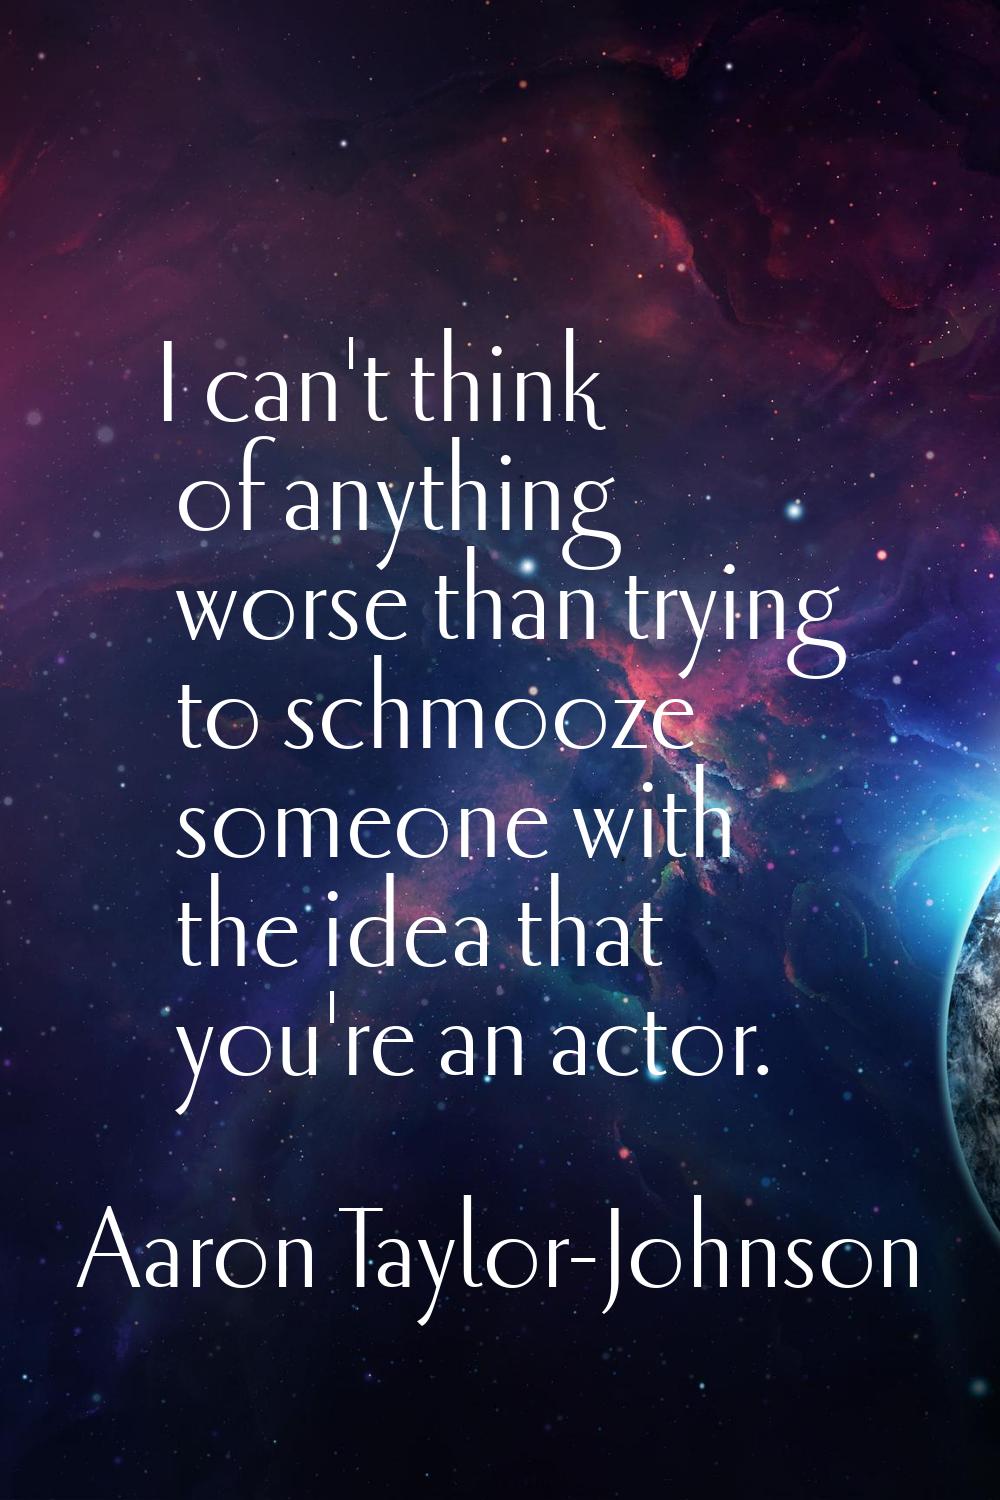 I can't think of anything worse than trying to schmooze someone with the idea that you're an actor.